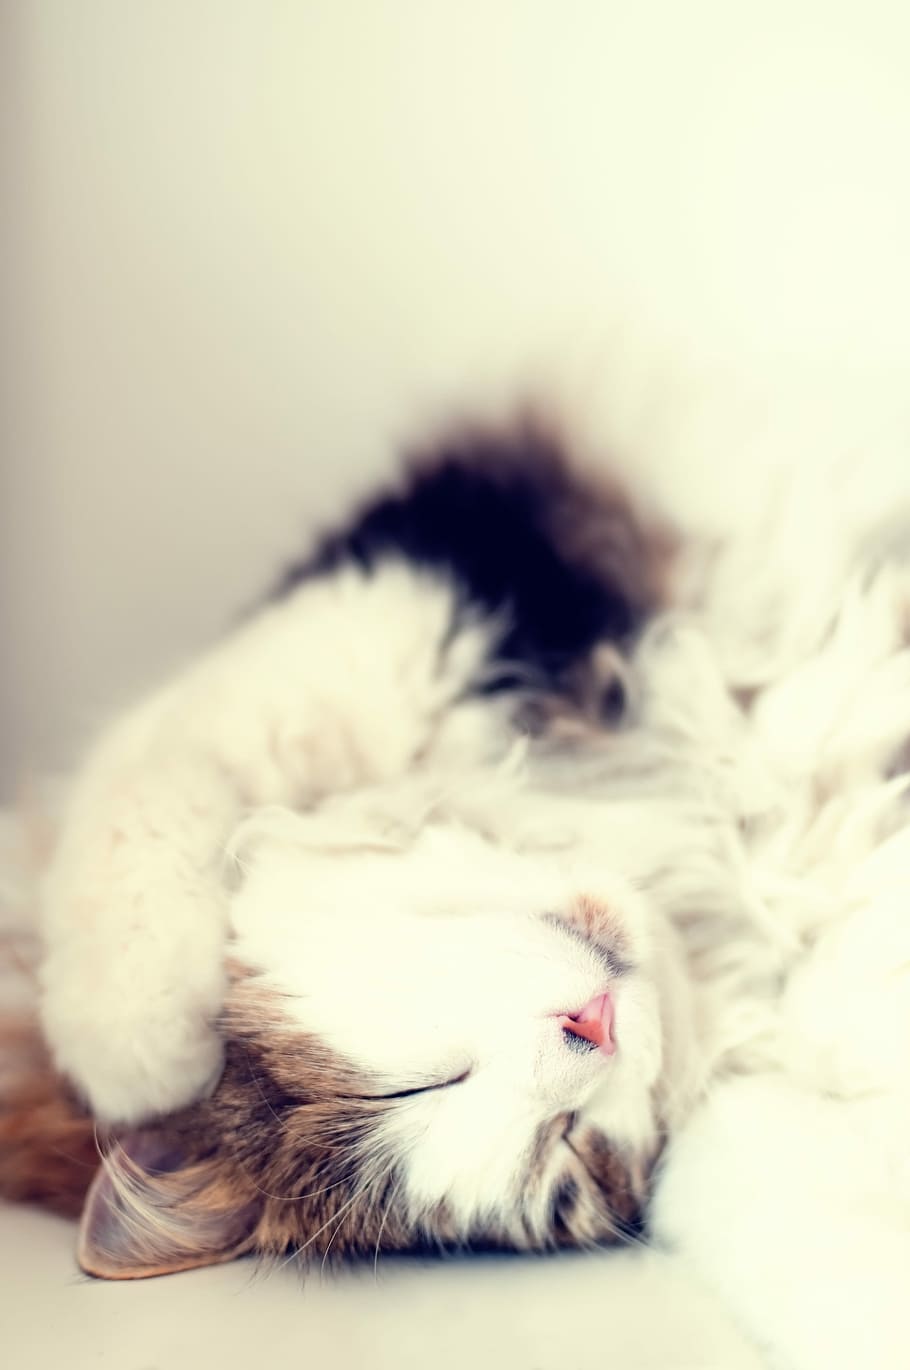 brown, white, fur cat, sleeping, surface, fur, cat, white surface, pets, domestic Cat